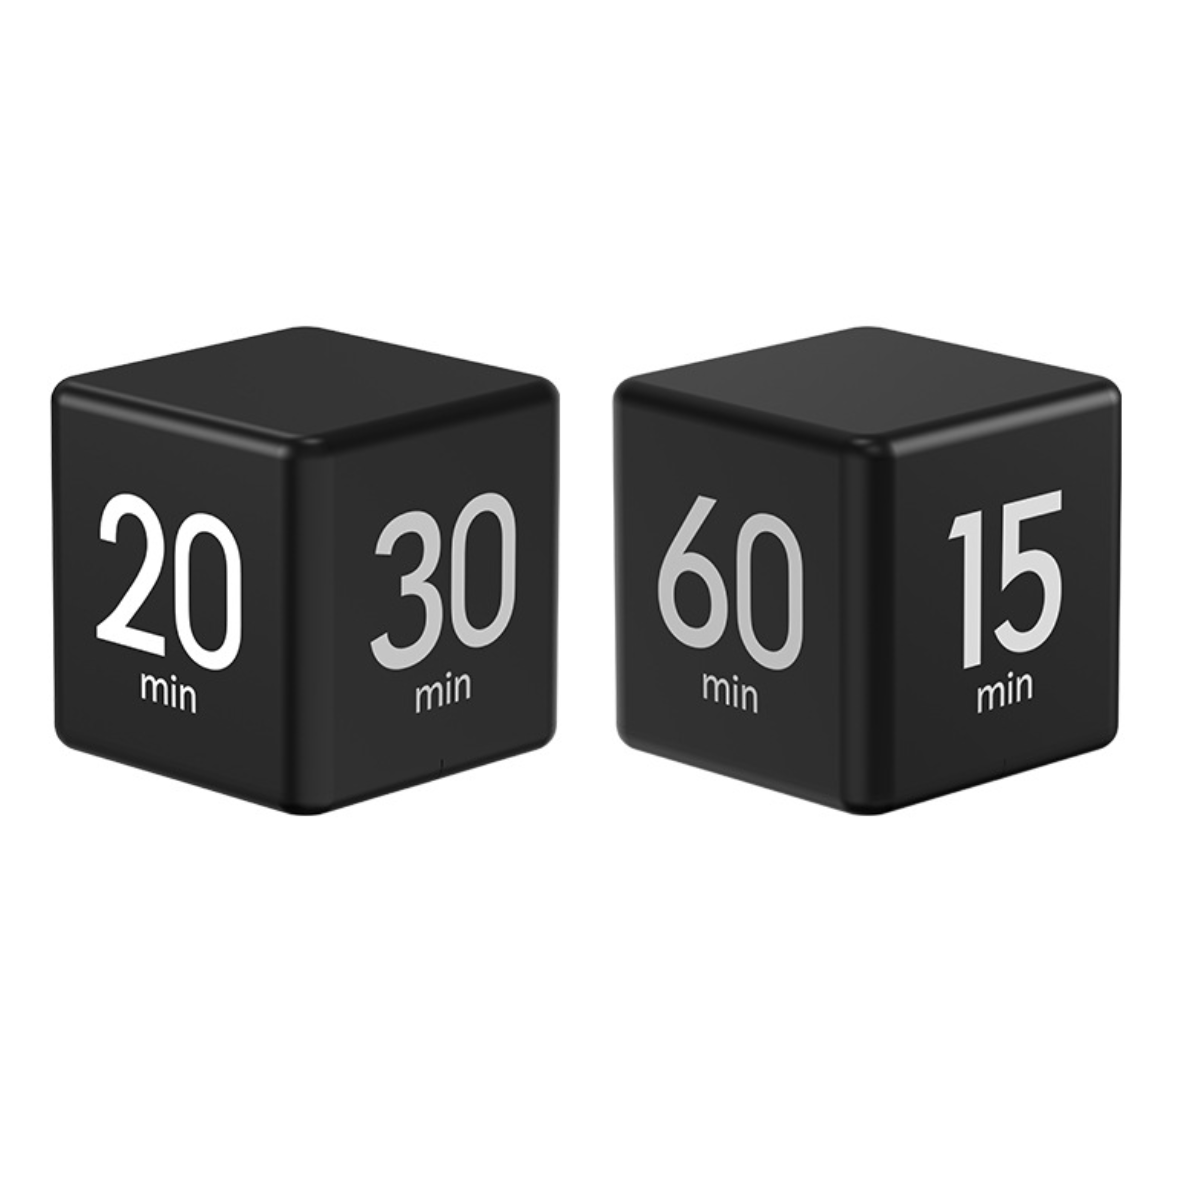 15-20-30-60 Easy operate Countdown Schwarz Cube timing UWOT Rubik\'s to Timer Timer: Precise minutes